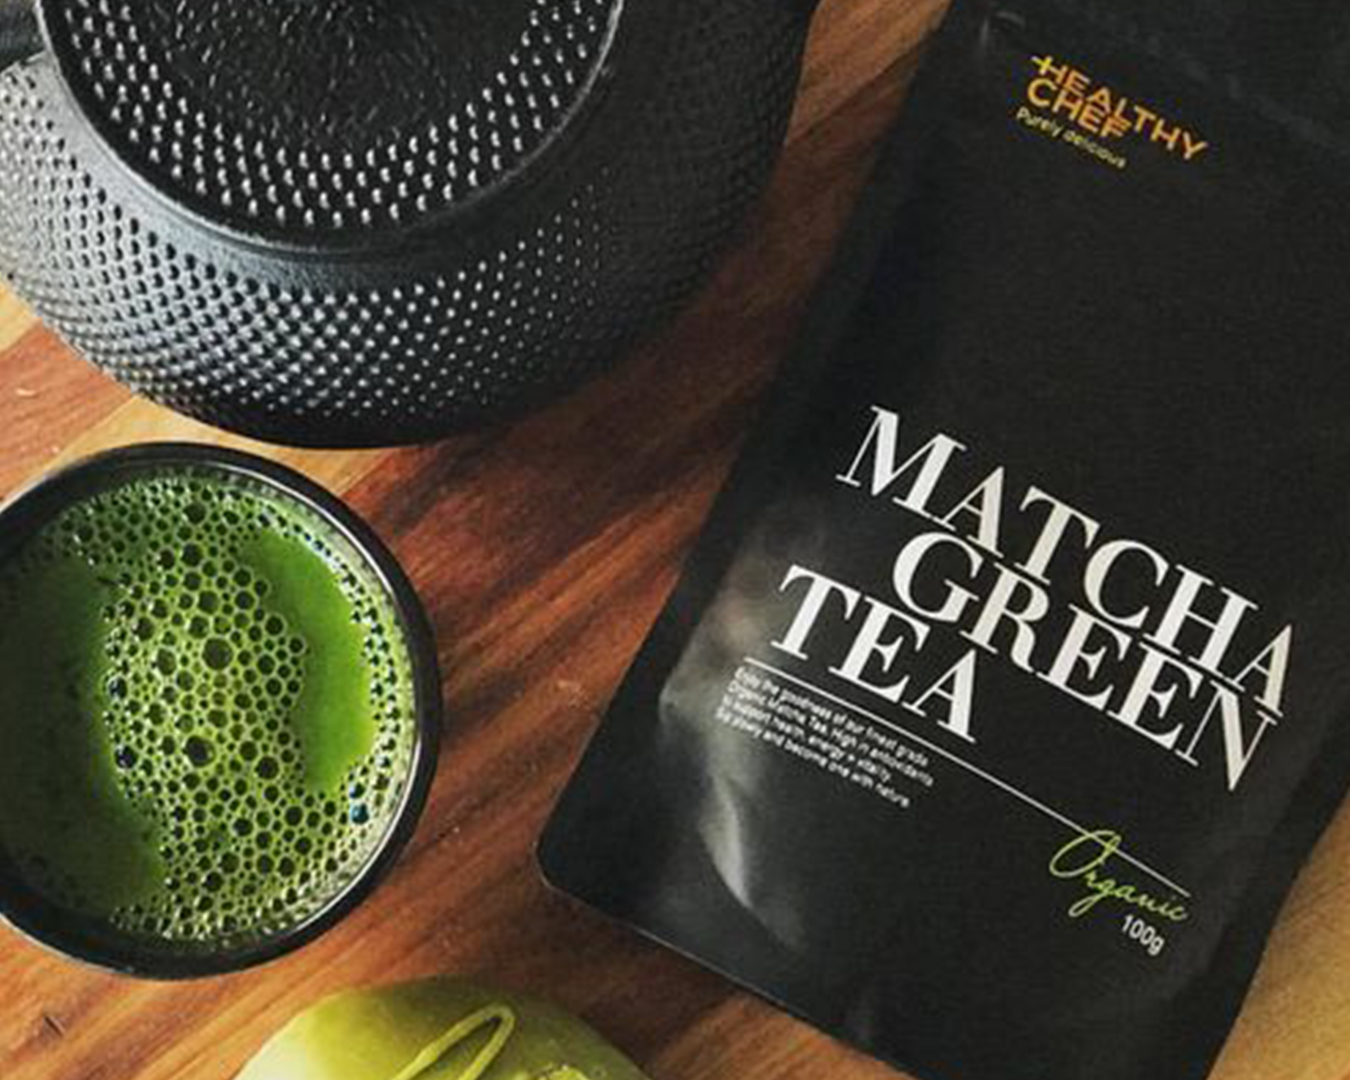 Matcha Tea pouch from The Healthy Chef